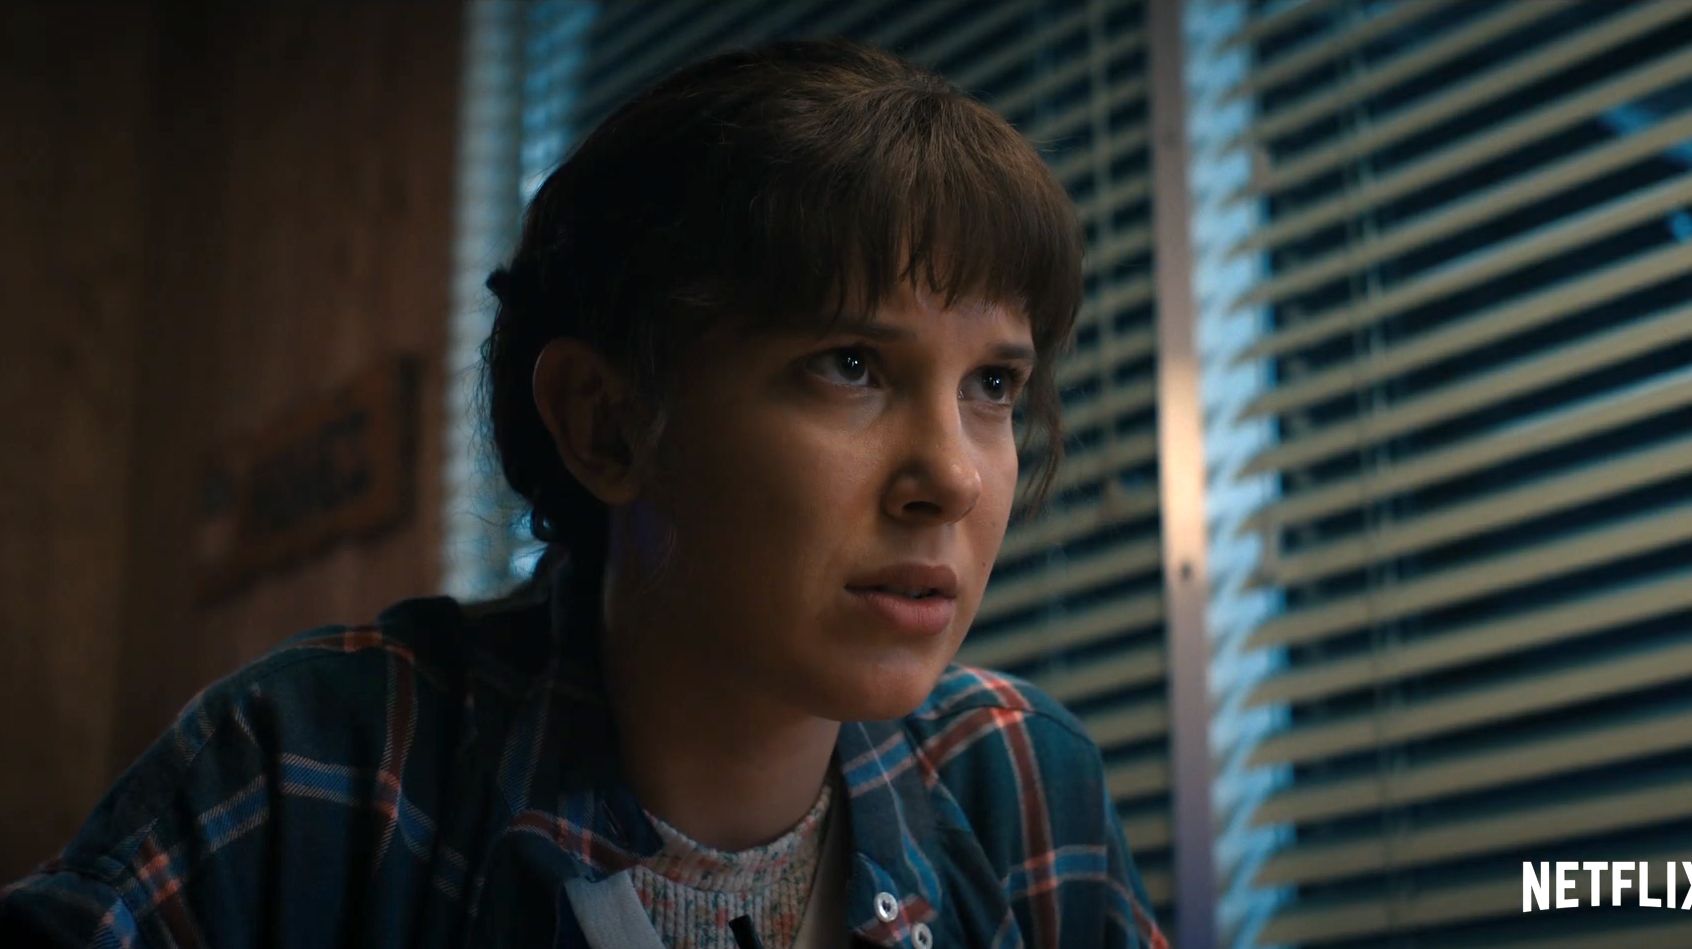 Stranger Things Season 4, Volume 2 to 'Punch You in the Heart